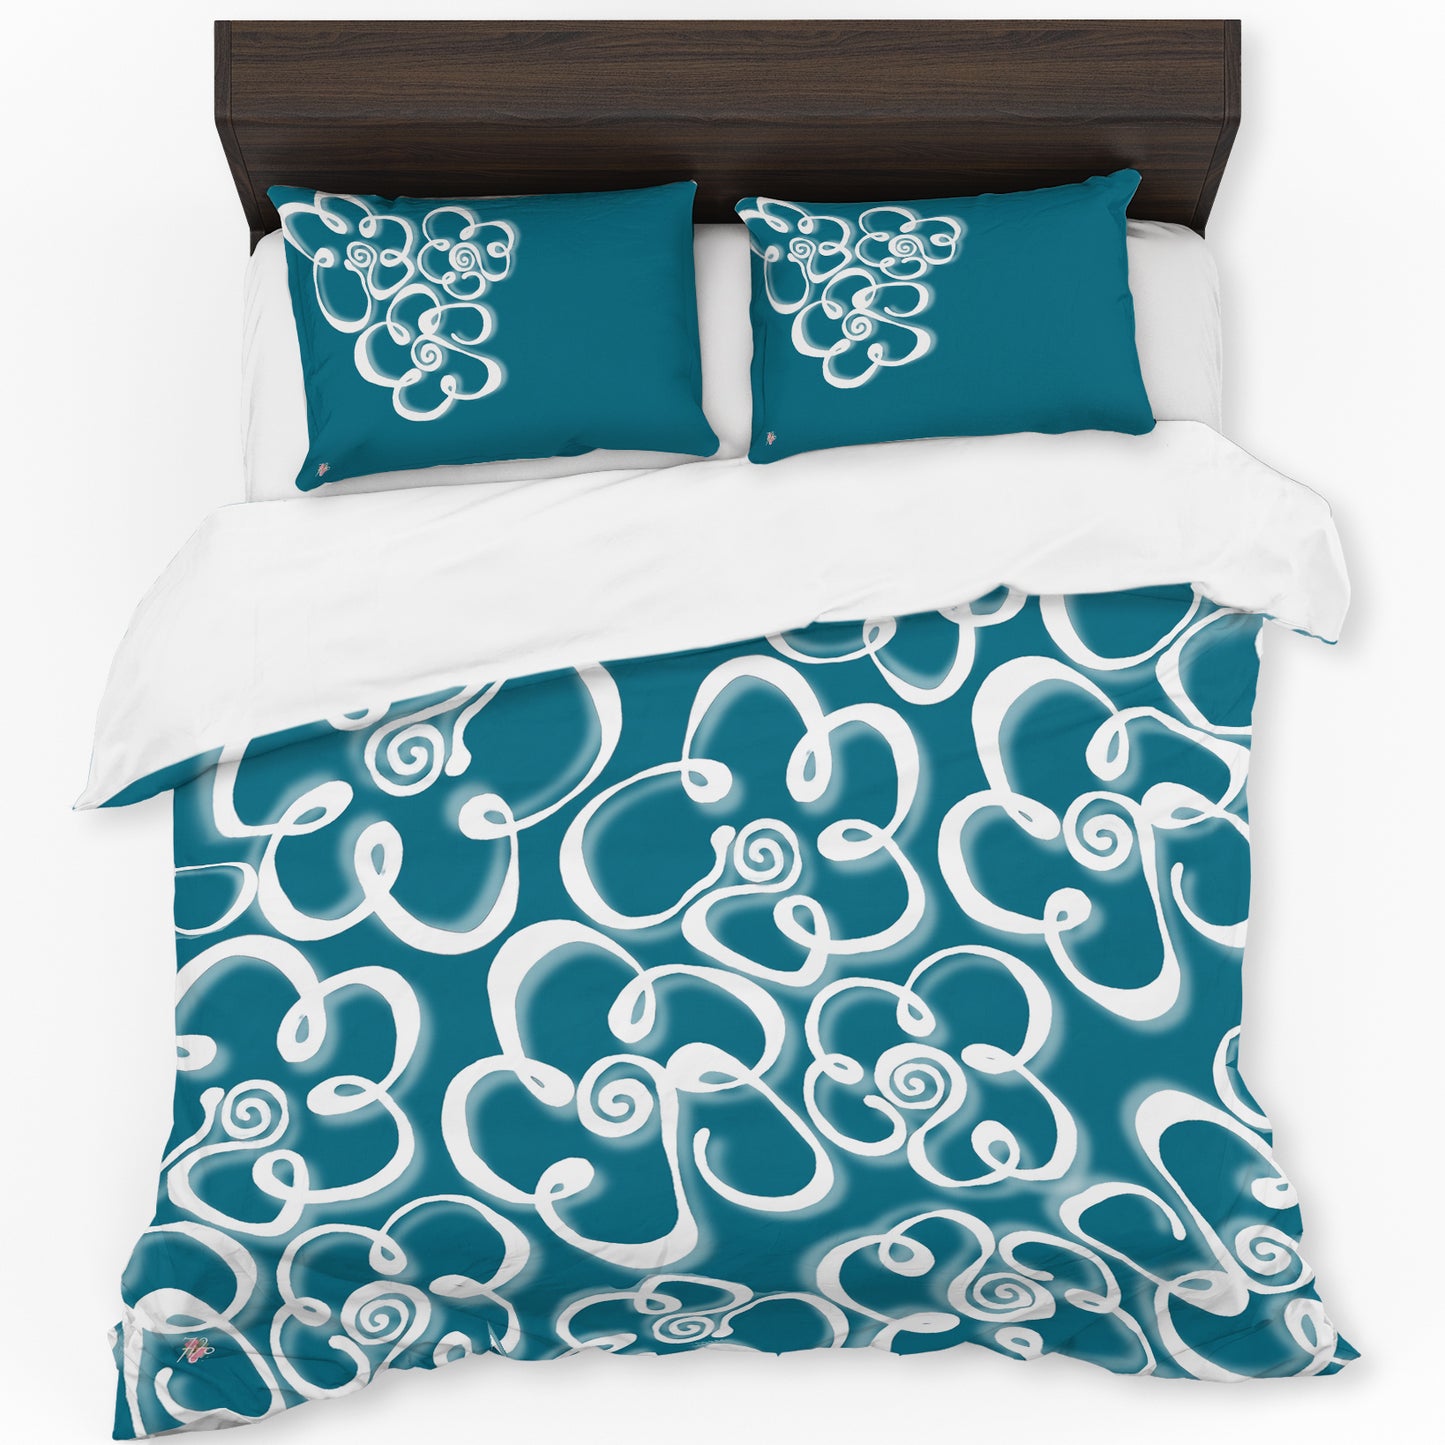 Daisies on Teal Duvet Cover Set By Fifo